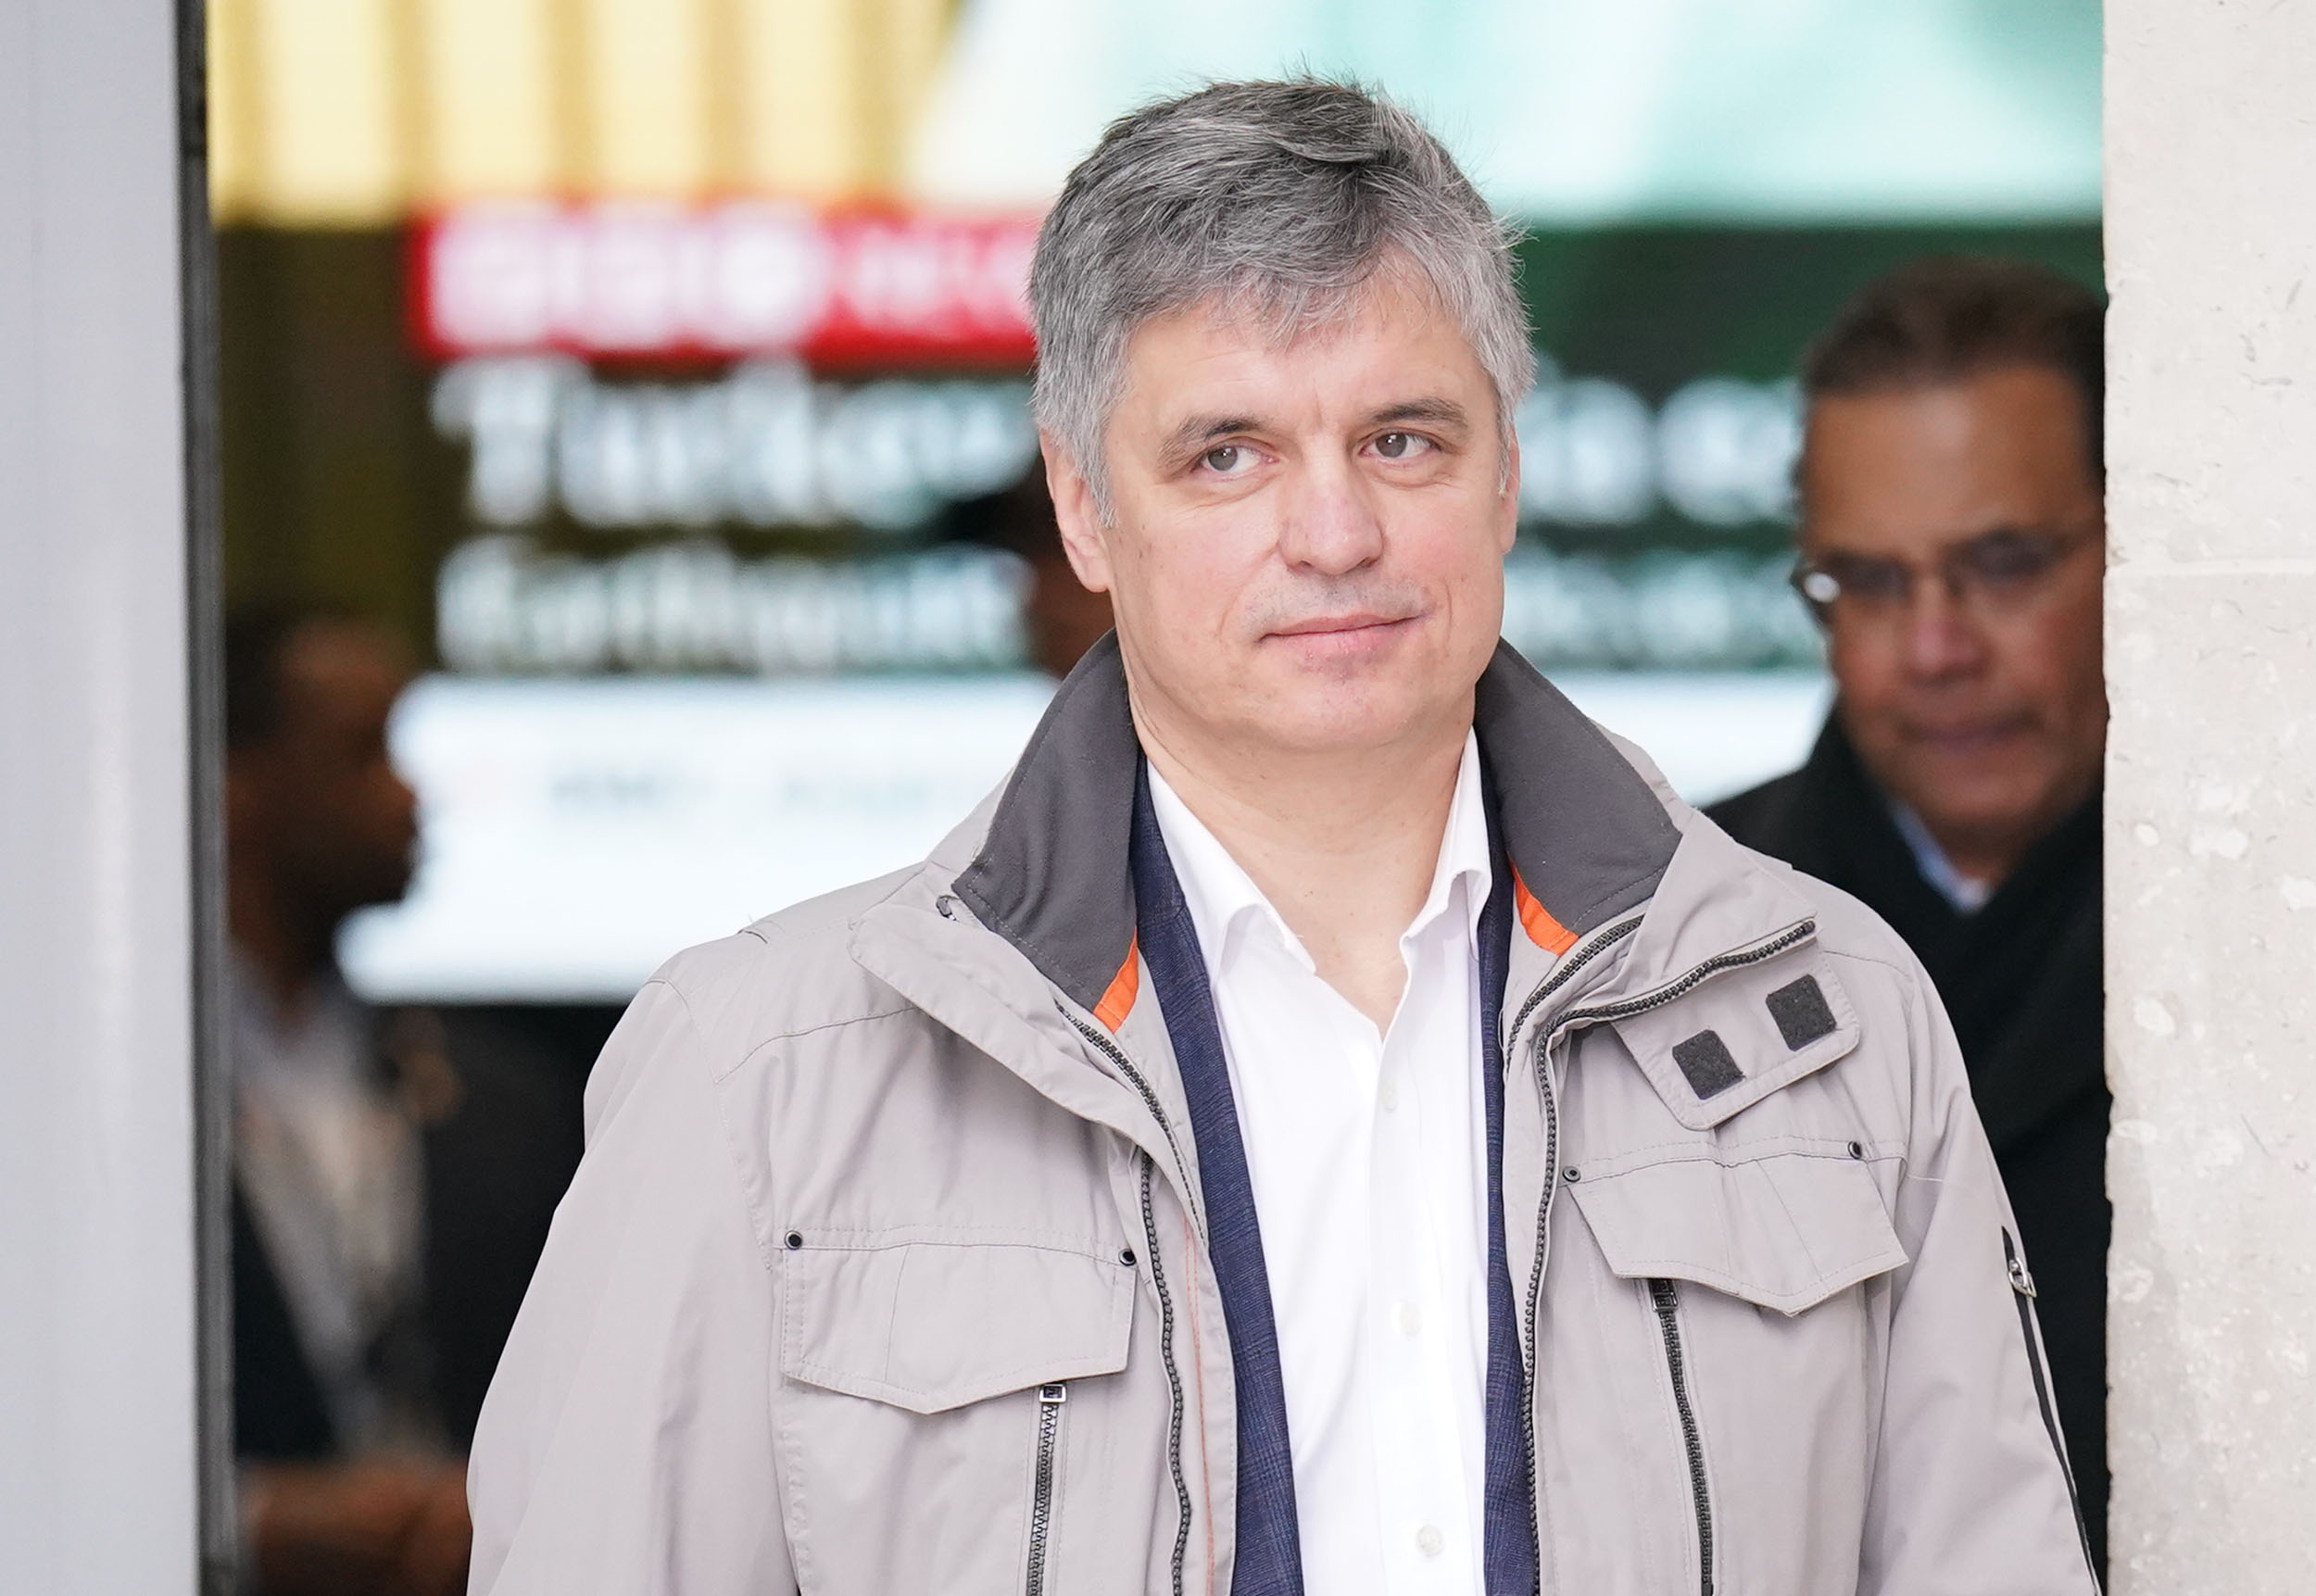 Ukrainian Ambassador to the UK, Vadym Prystaiko, leaves BBC Broadcasting House in London, following an interview on February 12. 